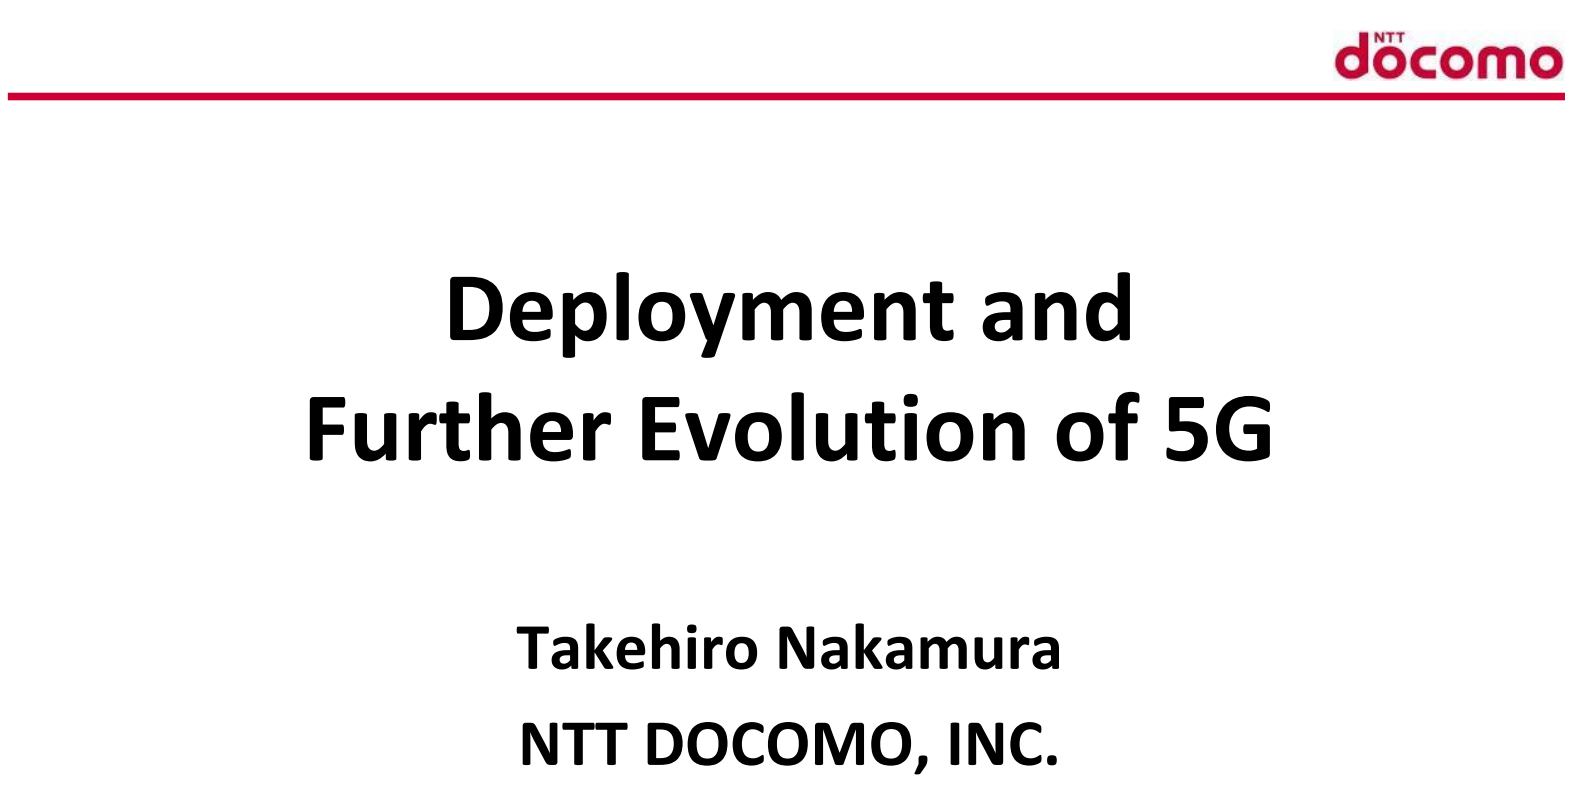 Deployment and Further Evolution of 5G